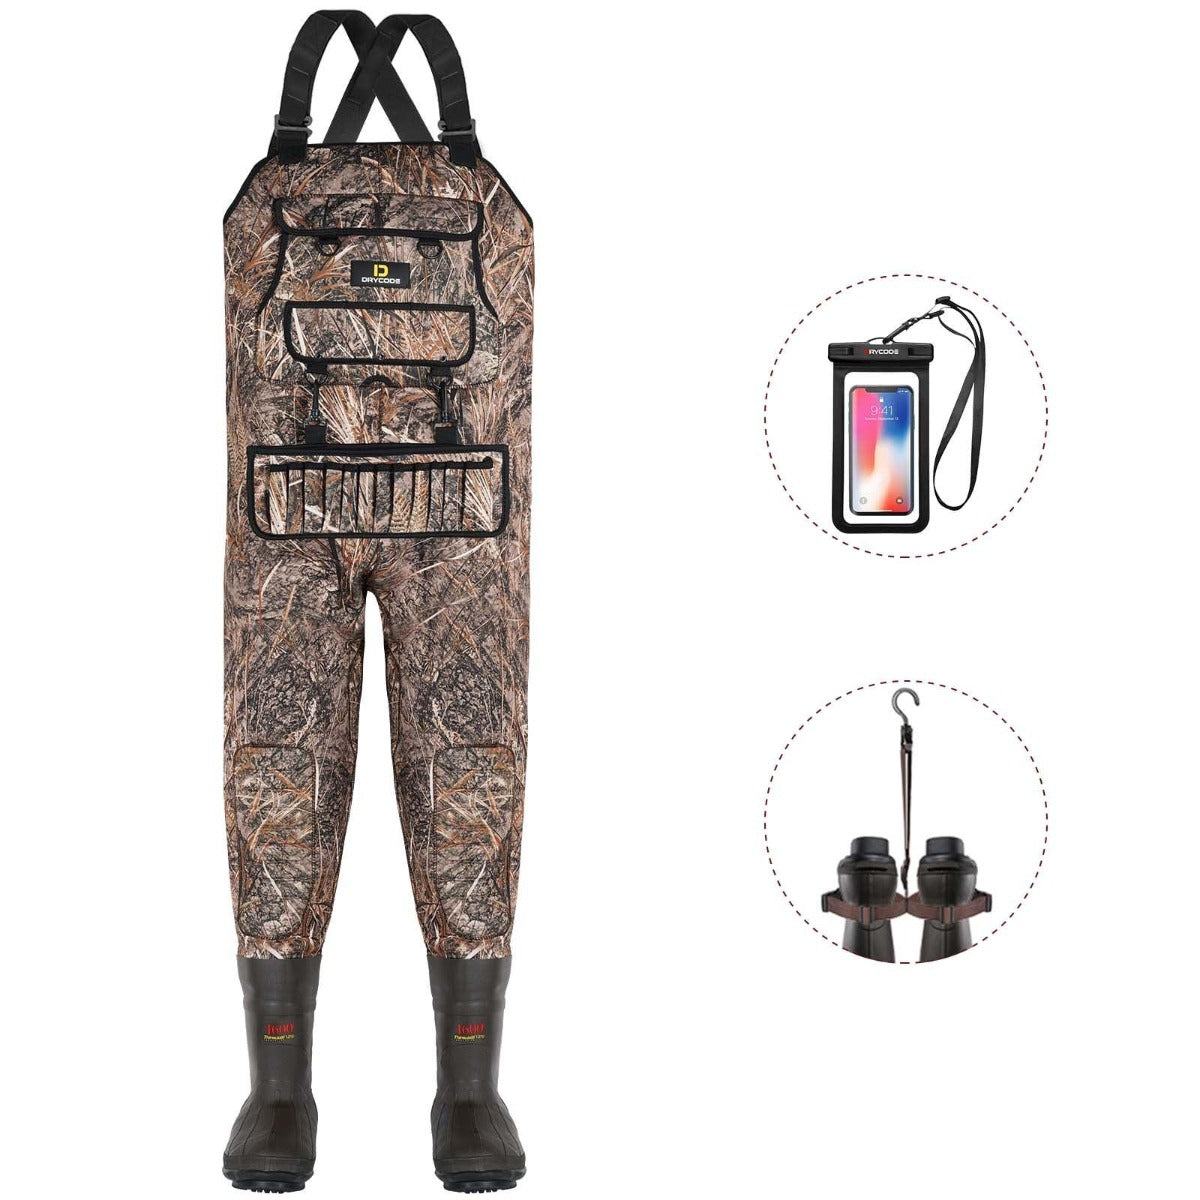 Chest Waders with Boots 1600g Insulated Neoprene Waders for